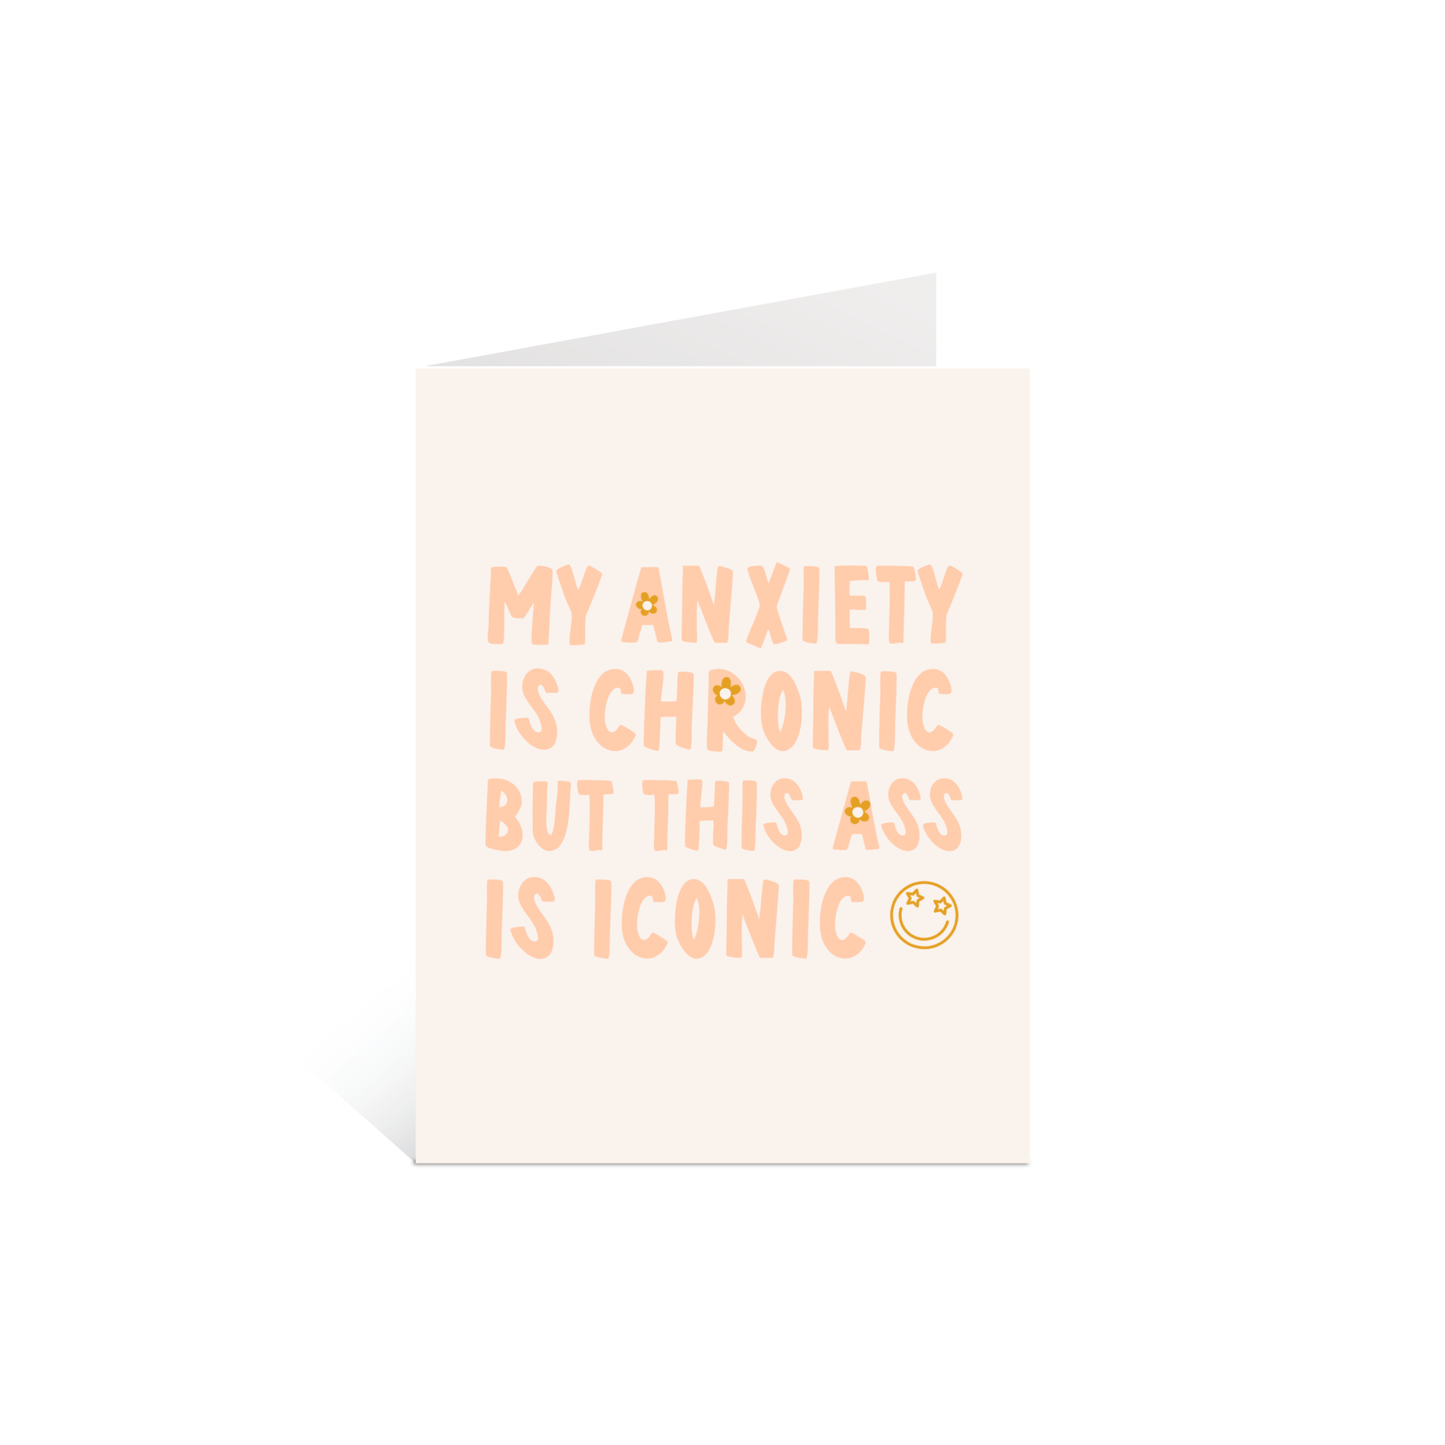 My Anxiety is Chronic But This Ass is Iconic Greeting Card - Calladine Creative Co